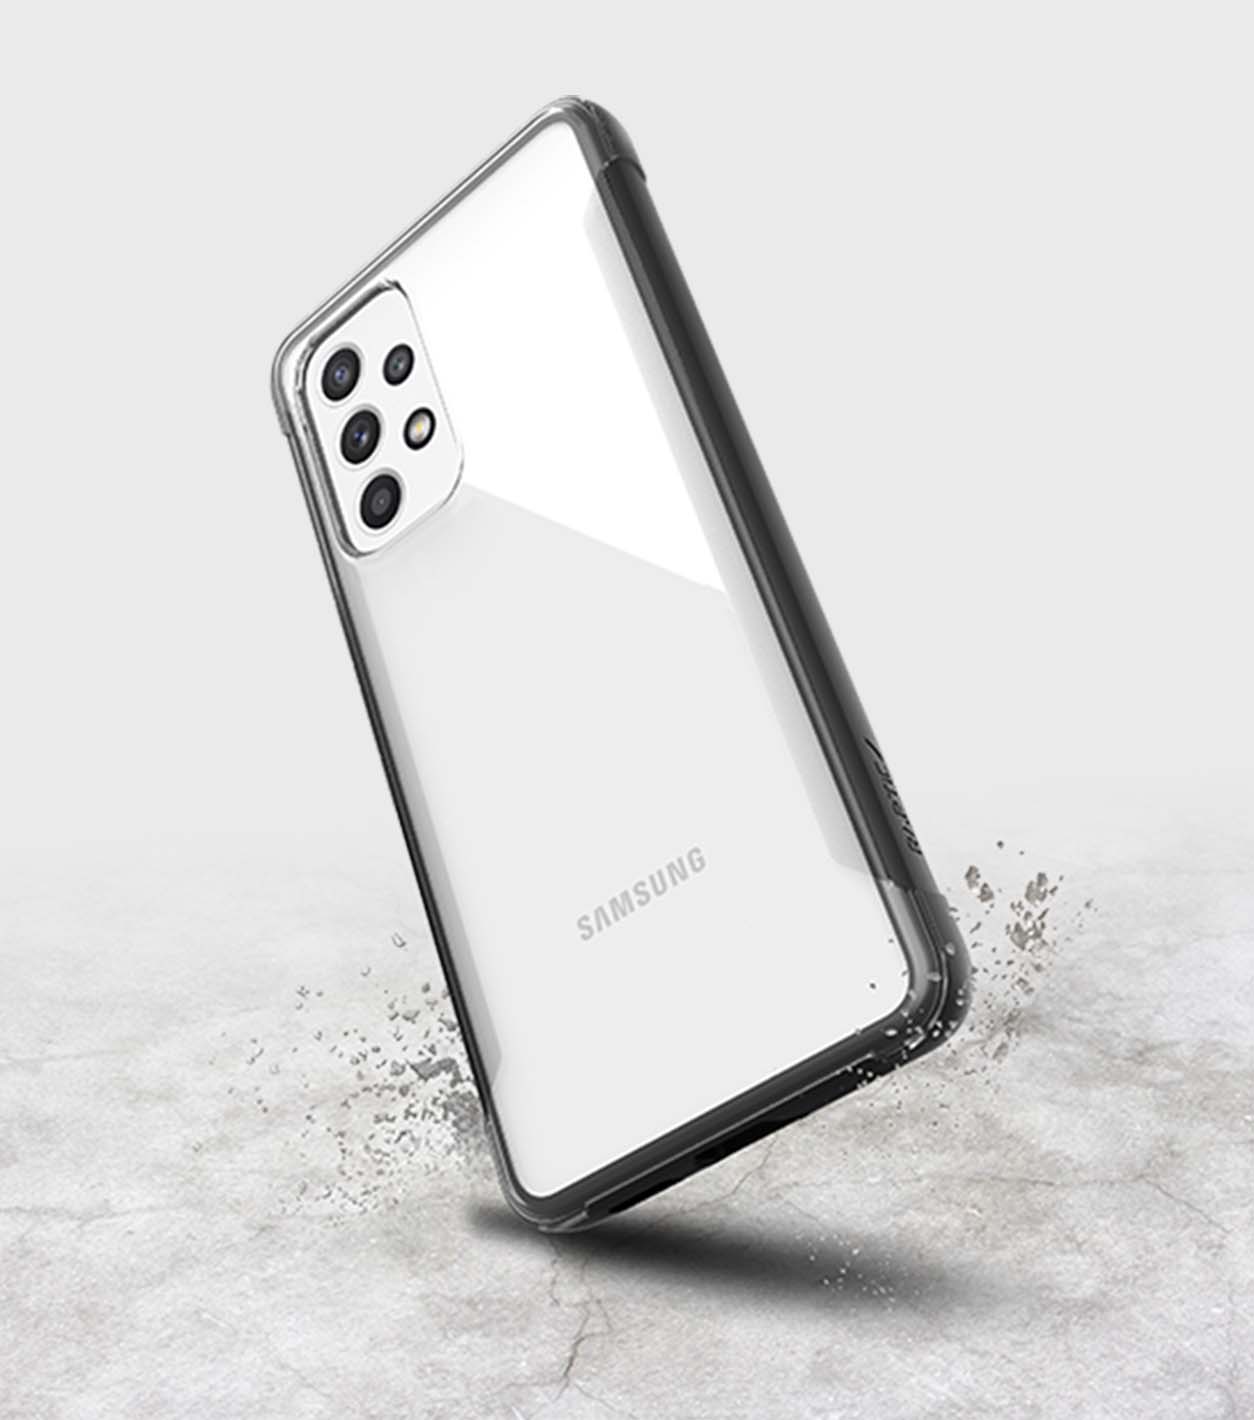 A Raptic Strong Samsung Galaxy A53 smartphone with a reflective back and quad-camera setup, encased in a Raptic EARTH eco-friendly, biodegradable protective cover, levitating above a concrete surface with a slight splash effect.